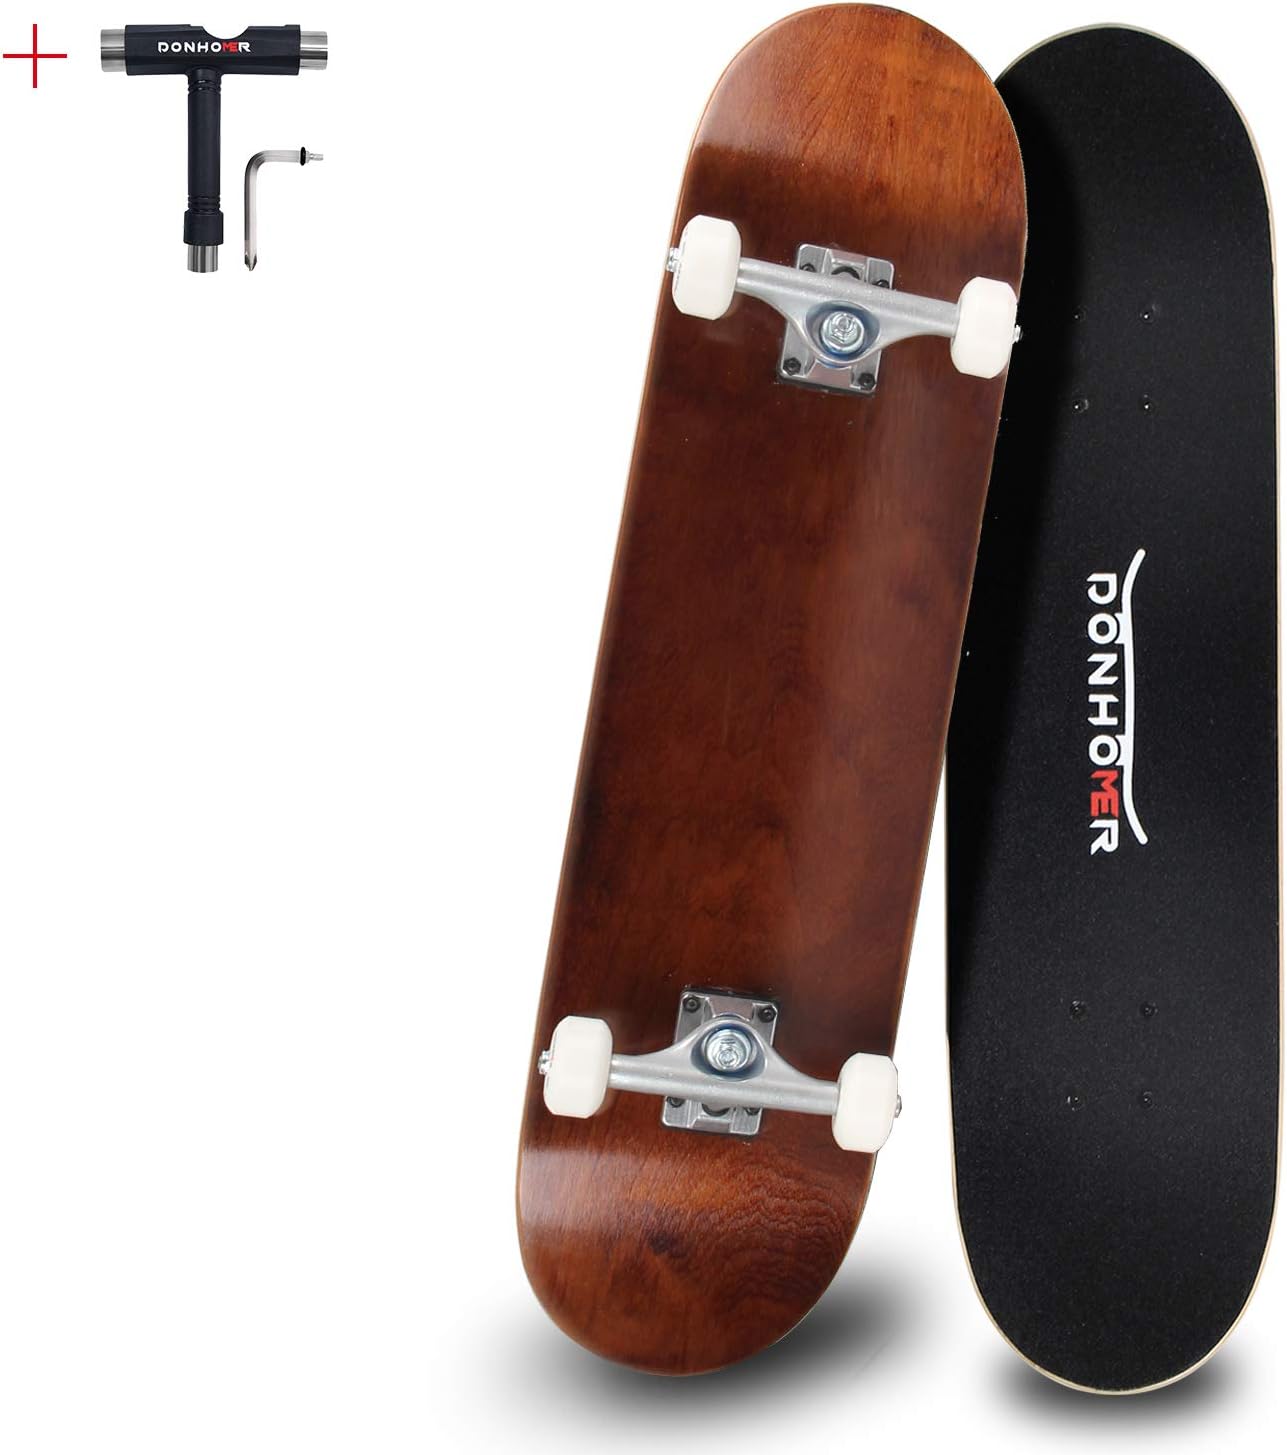 DONHOMER Skateboards - 31x7.75 Pro Skateboard for Adults/Kids Girls/Boys with T-Tool 【Pro 7ply Maple Deck ABEC9】 (Brown02)